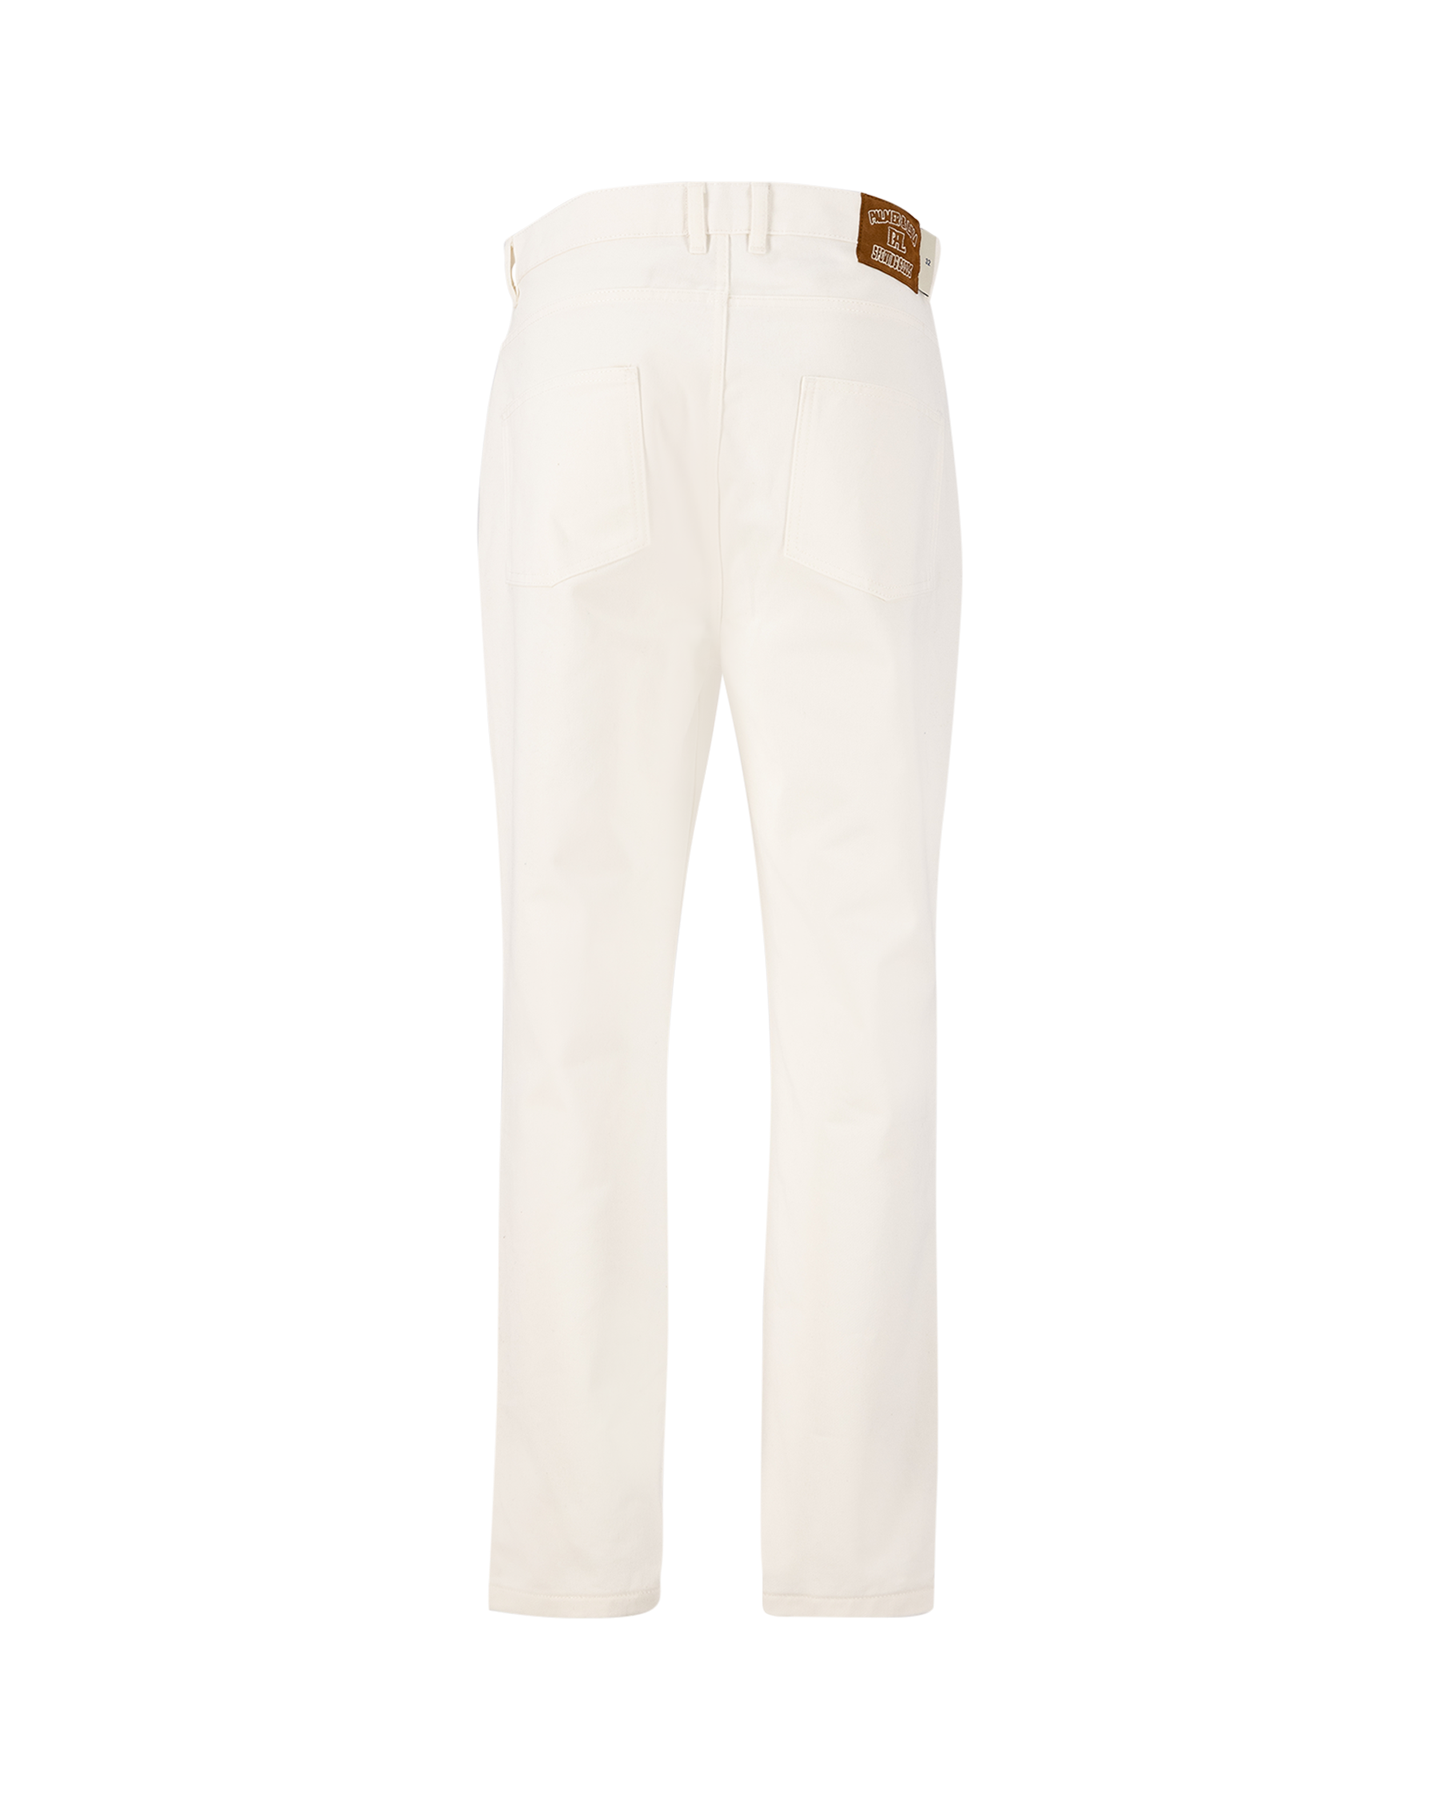 PAL Sporting Goods Off To The Races Riders Pants OFFWHITE 2